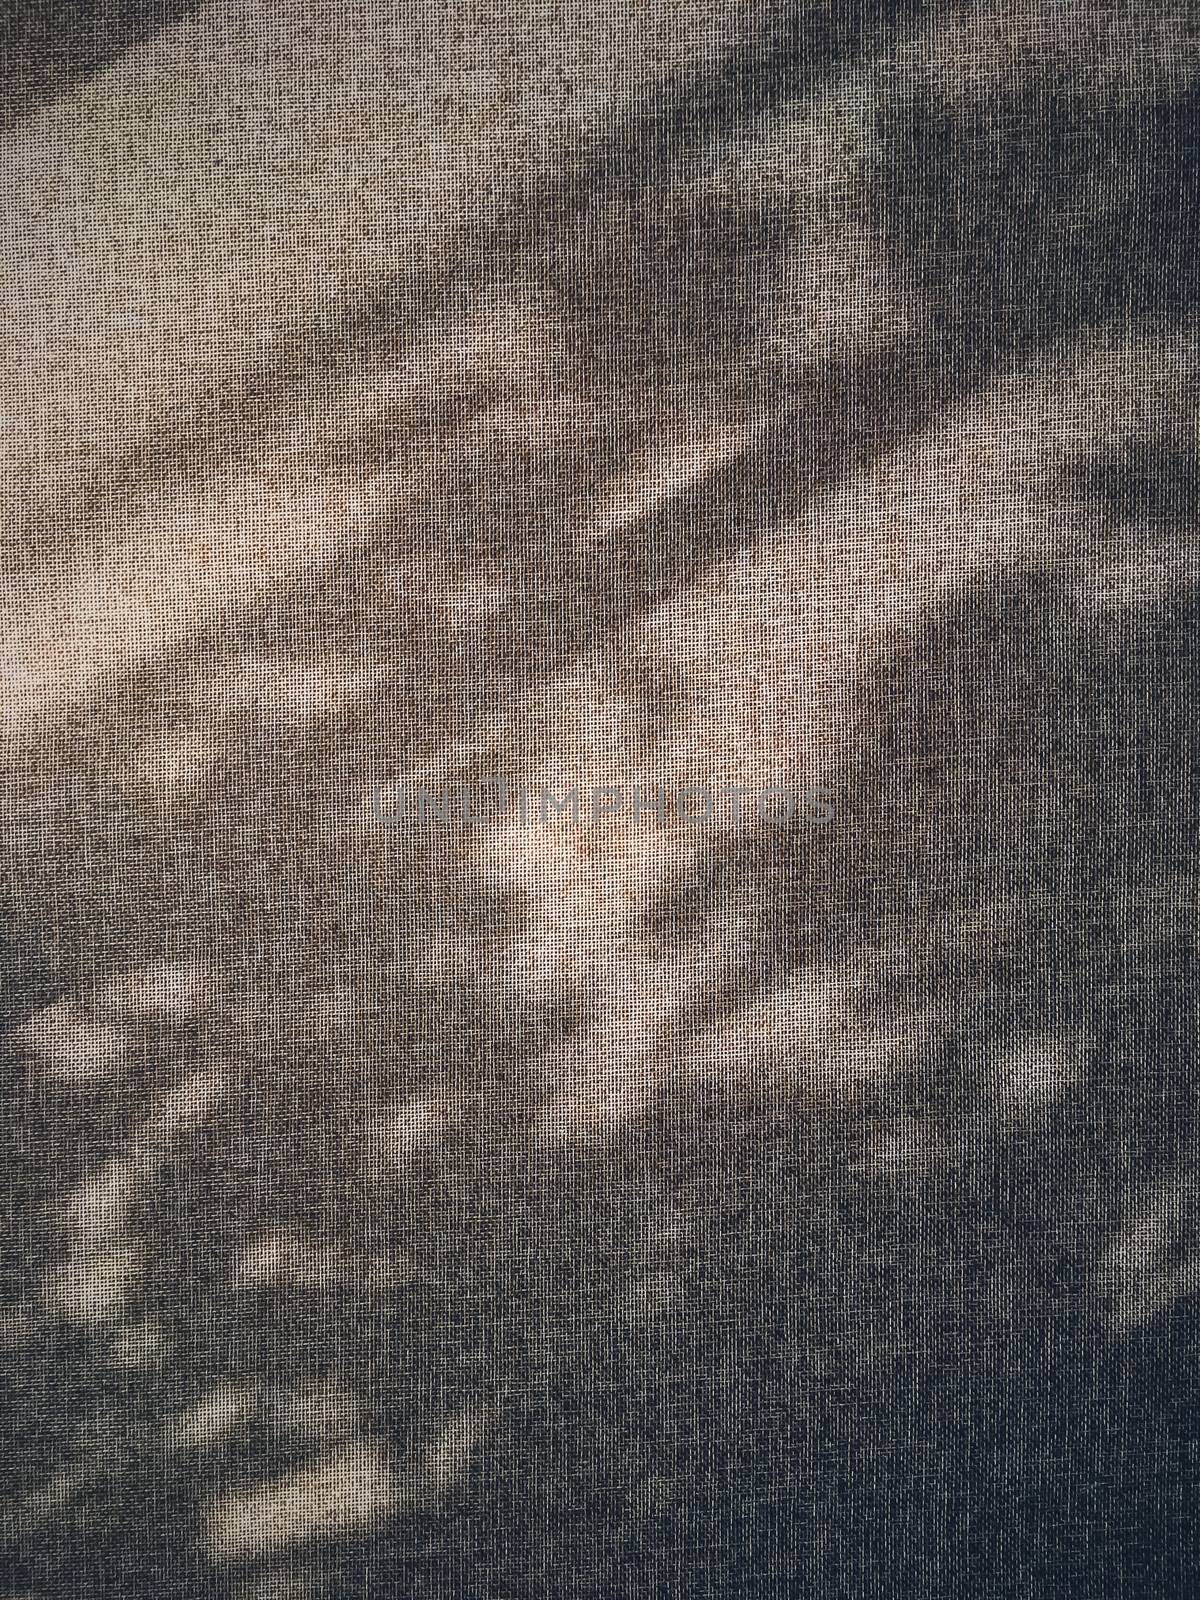 Linen texture and shadows as rustic background, fabric and material